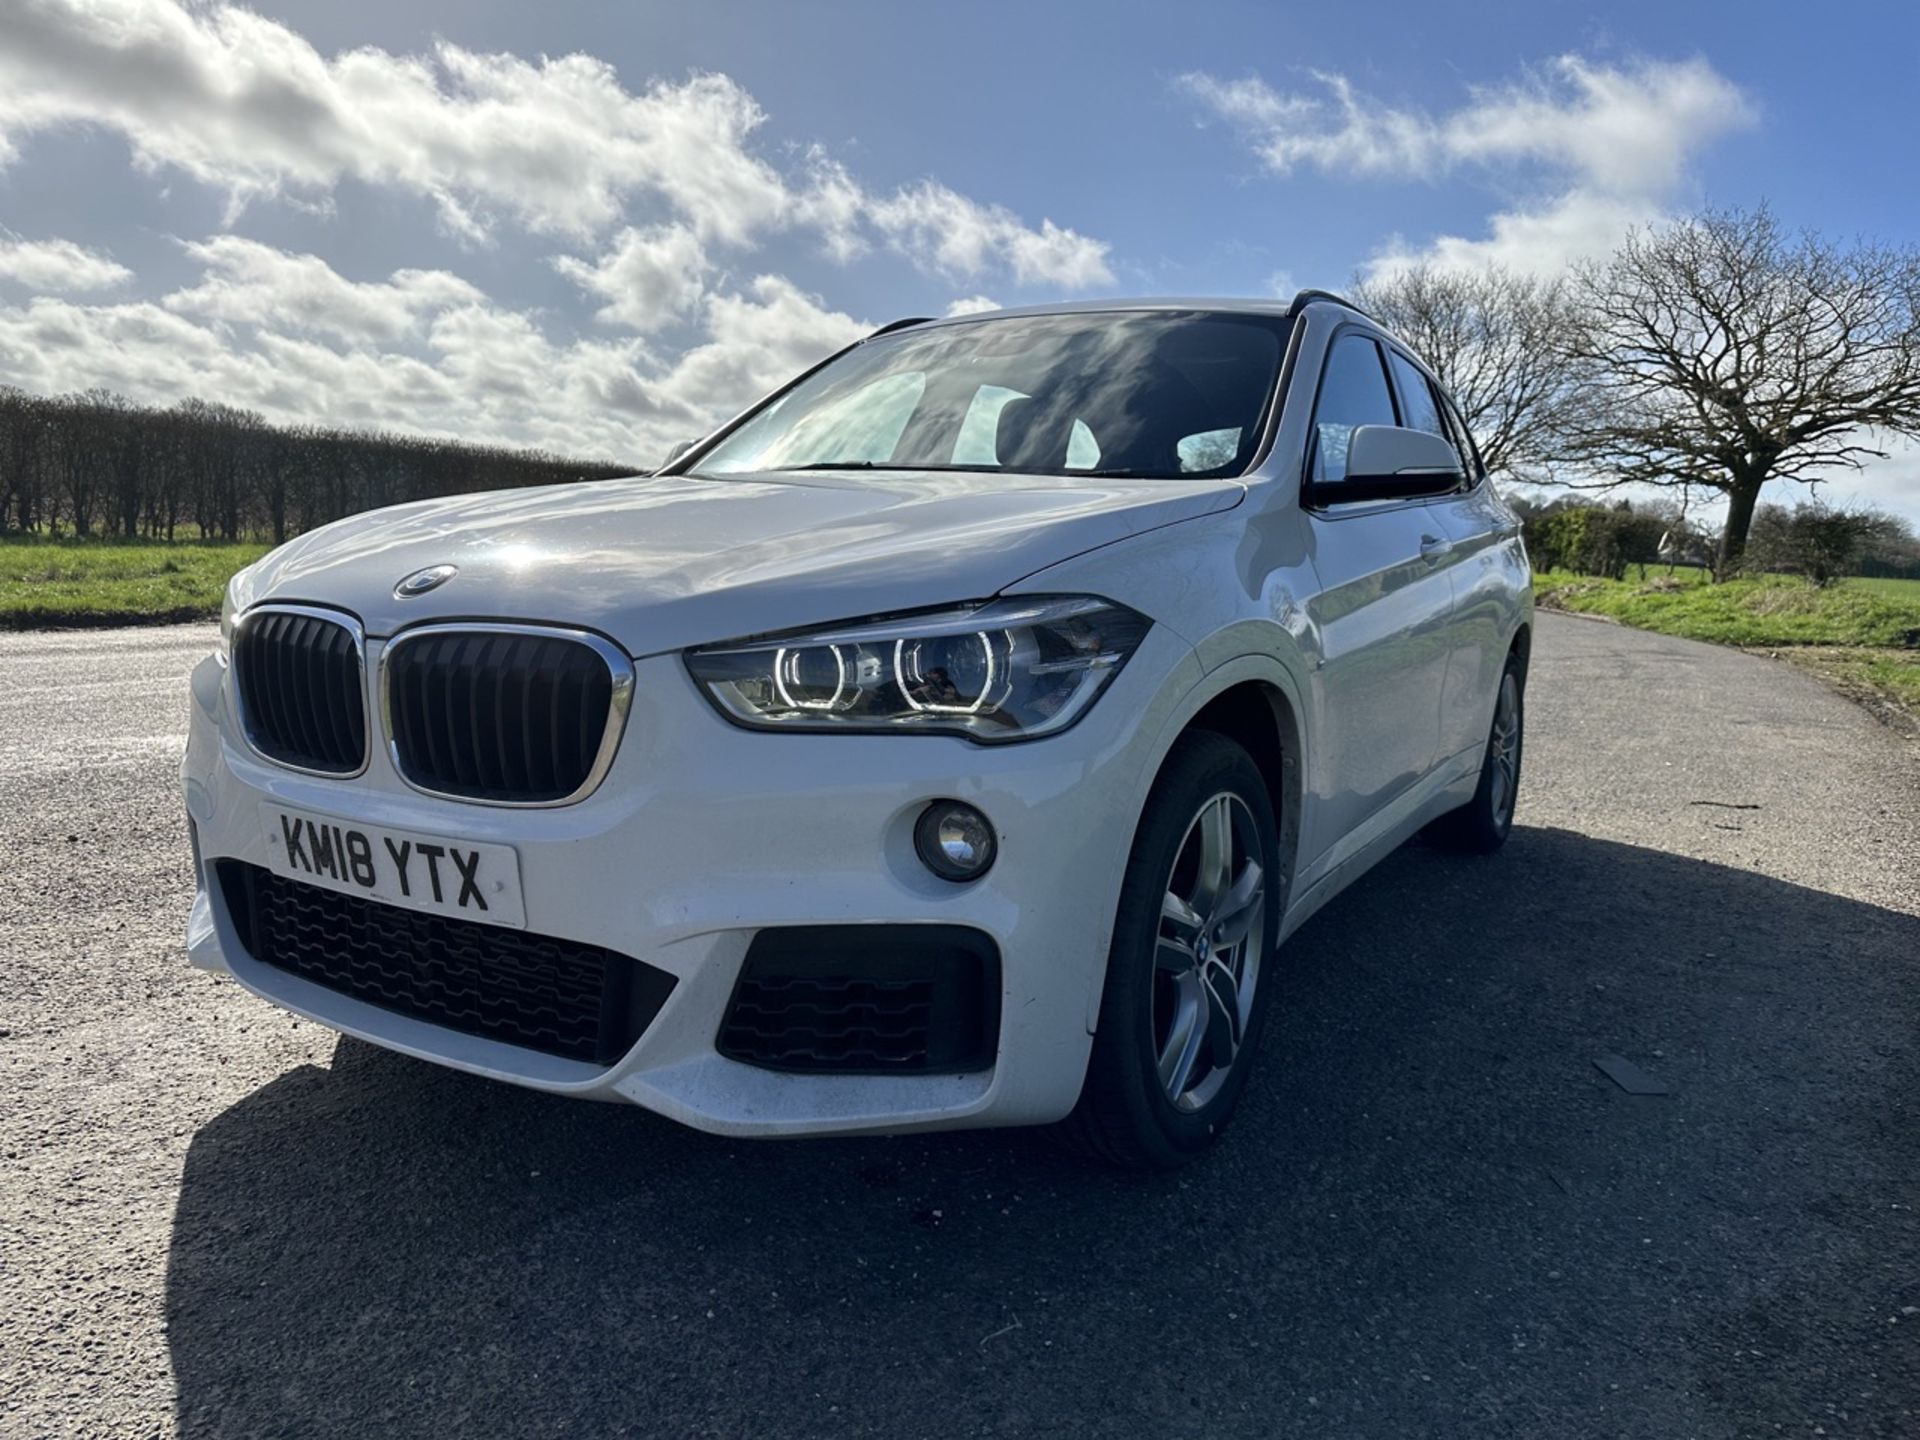 BMW X1 Xdrive20i M Sport Auto 20i - 2018 - 16.5k MILES ONLY - M SPORT Seats/badging - Image 3 of 22